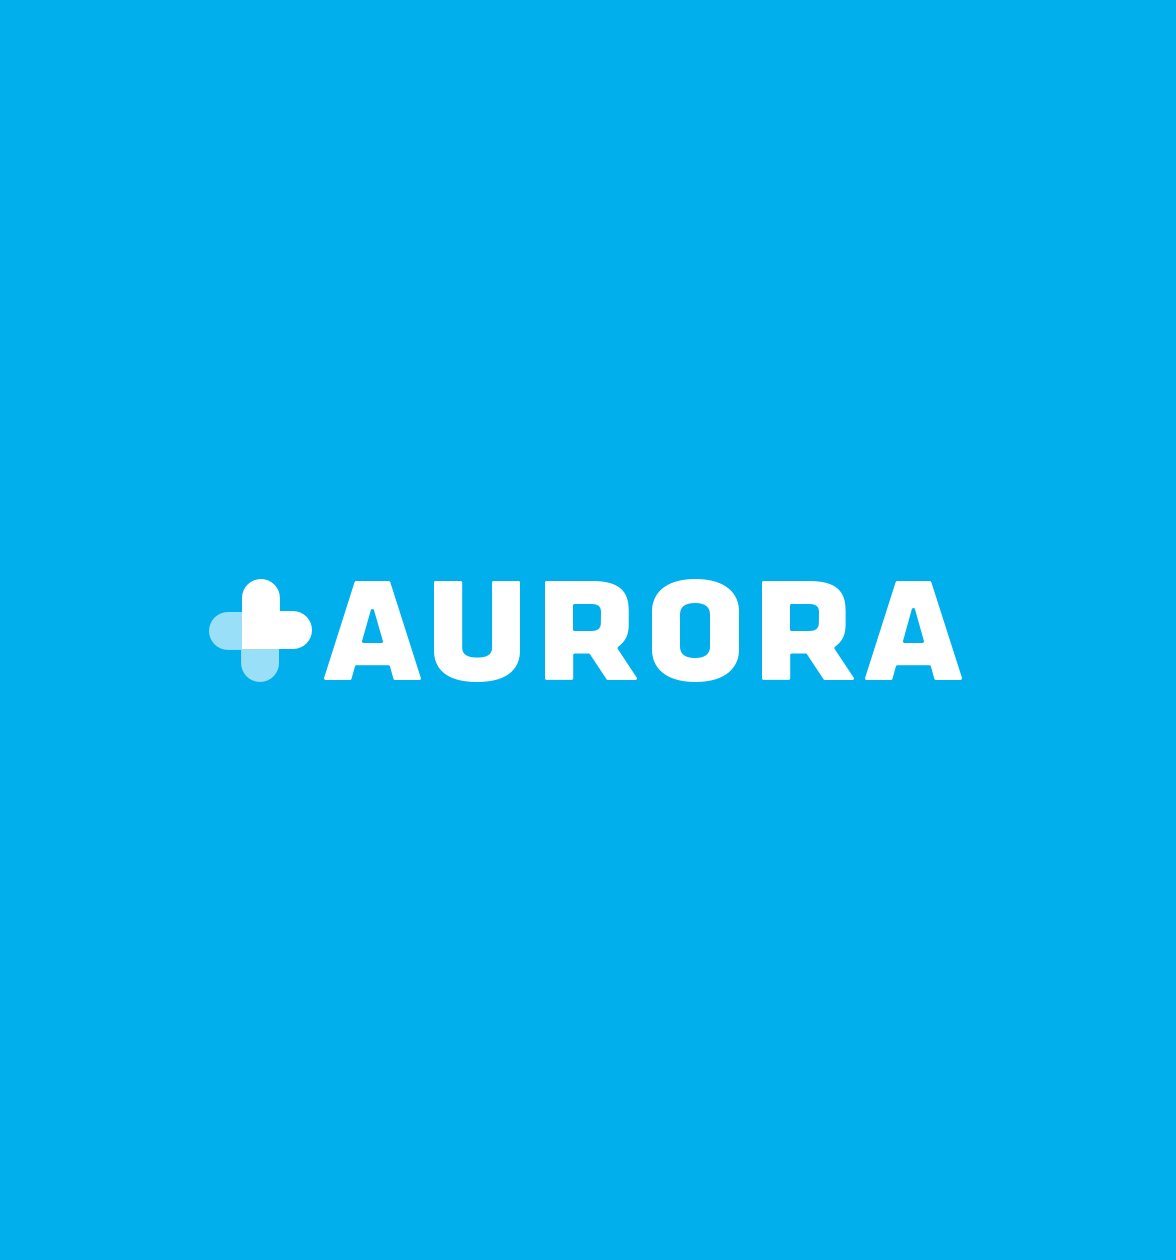 Why Should I Buy Medical Cannabis from Aurora Medical?